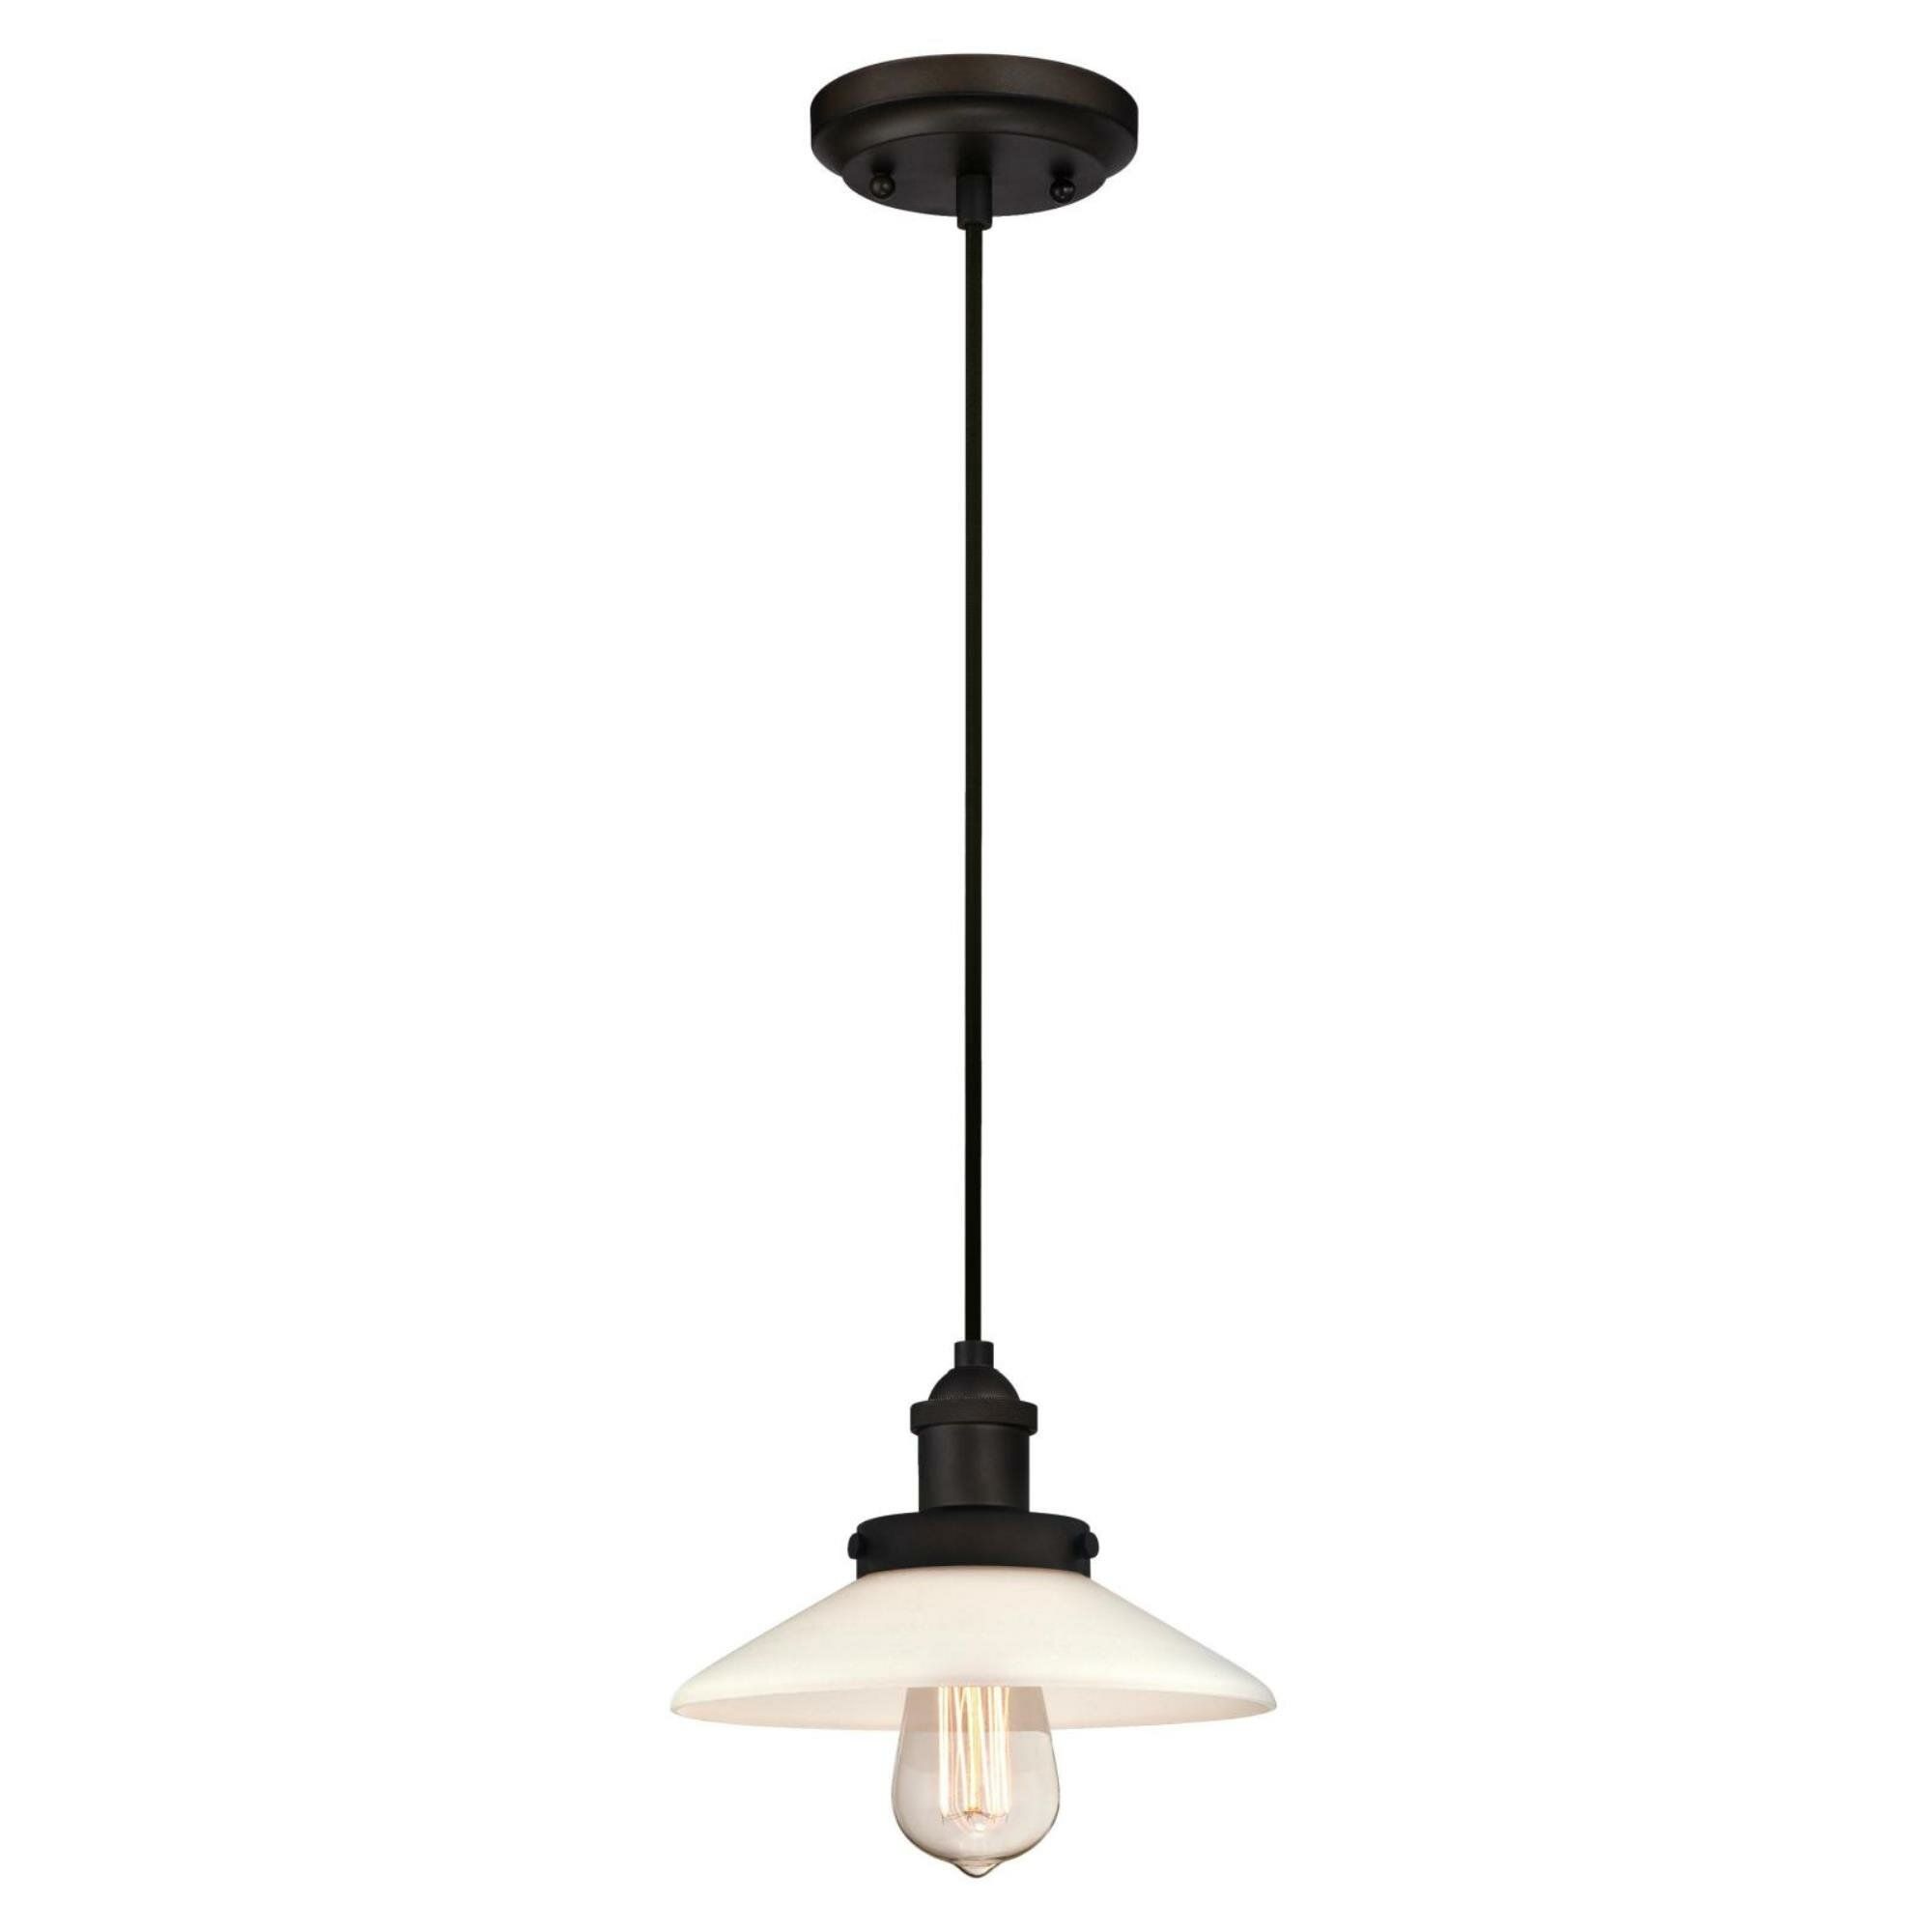 Darcella 1 Light Single Cone Pendant Pertaining To Abordale 1 Light Single Dome Pendants (View 17 of 30)